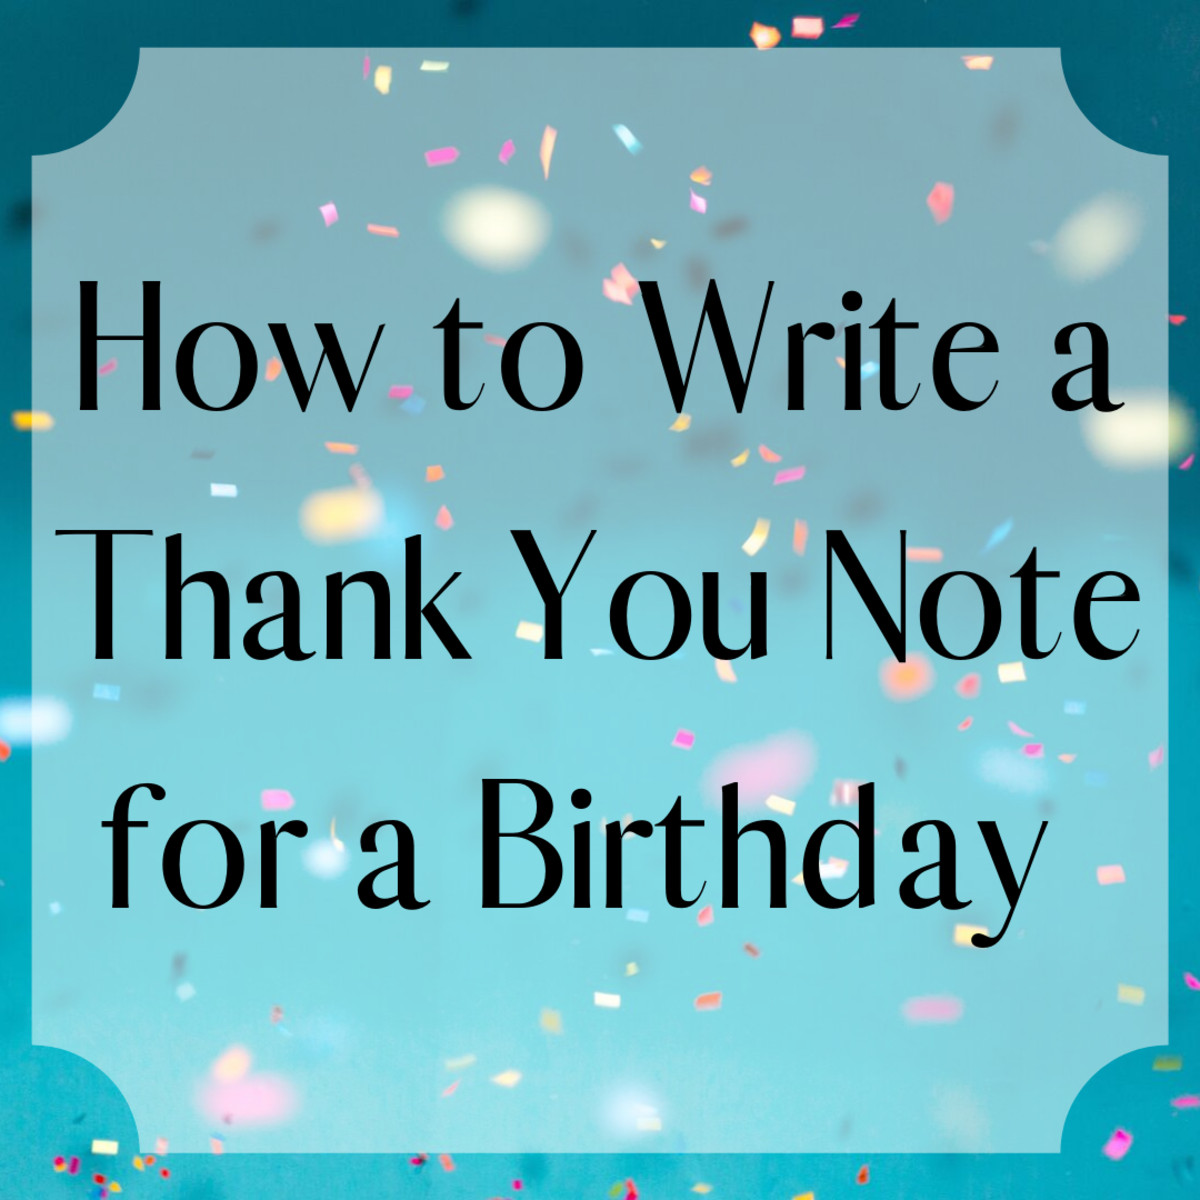 Thank You Note For Birthday Wishes
 Thank You Notes for Birthday Wishes